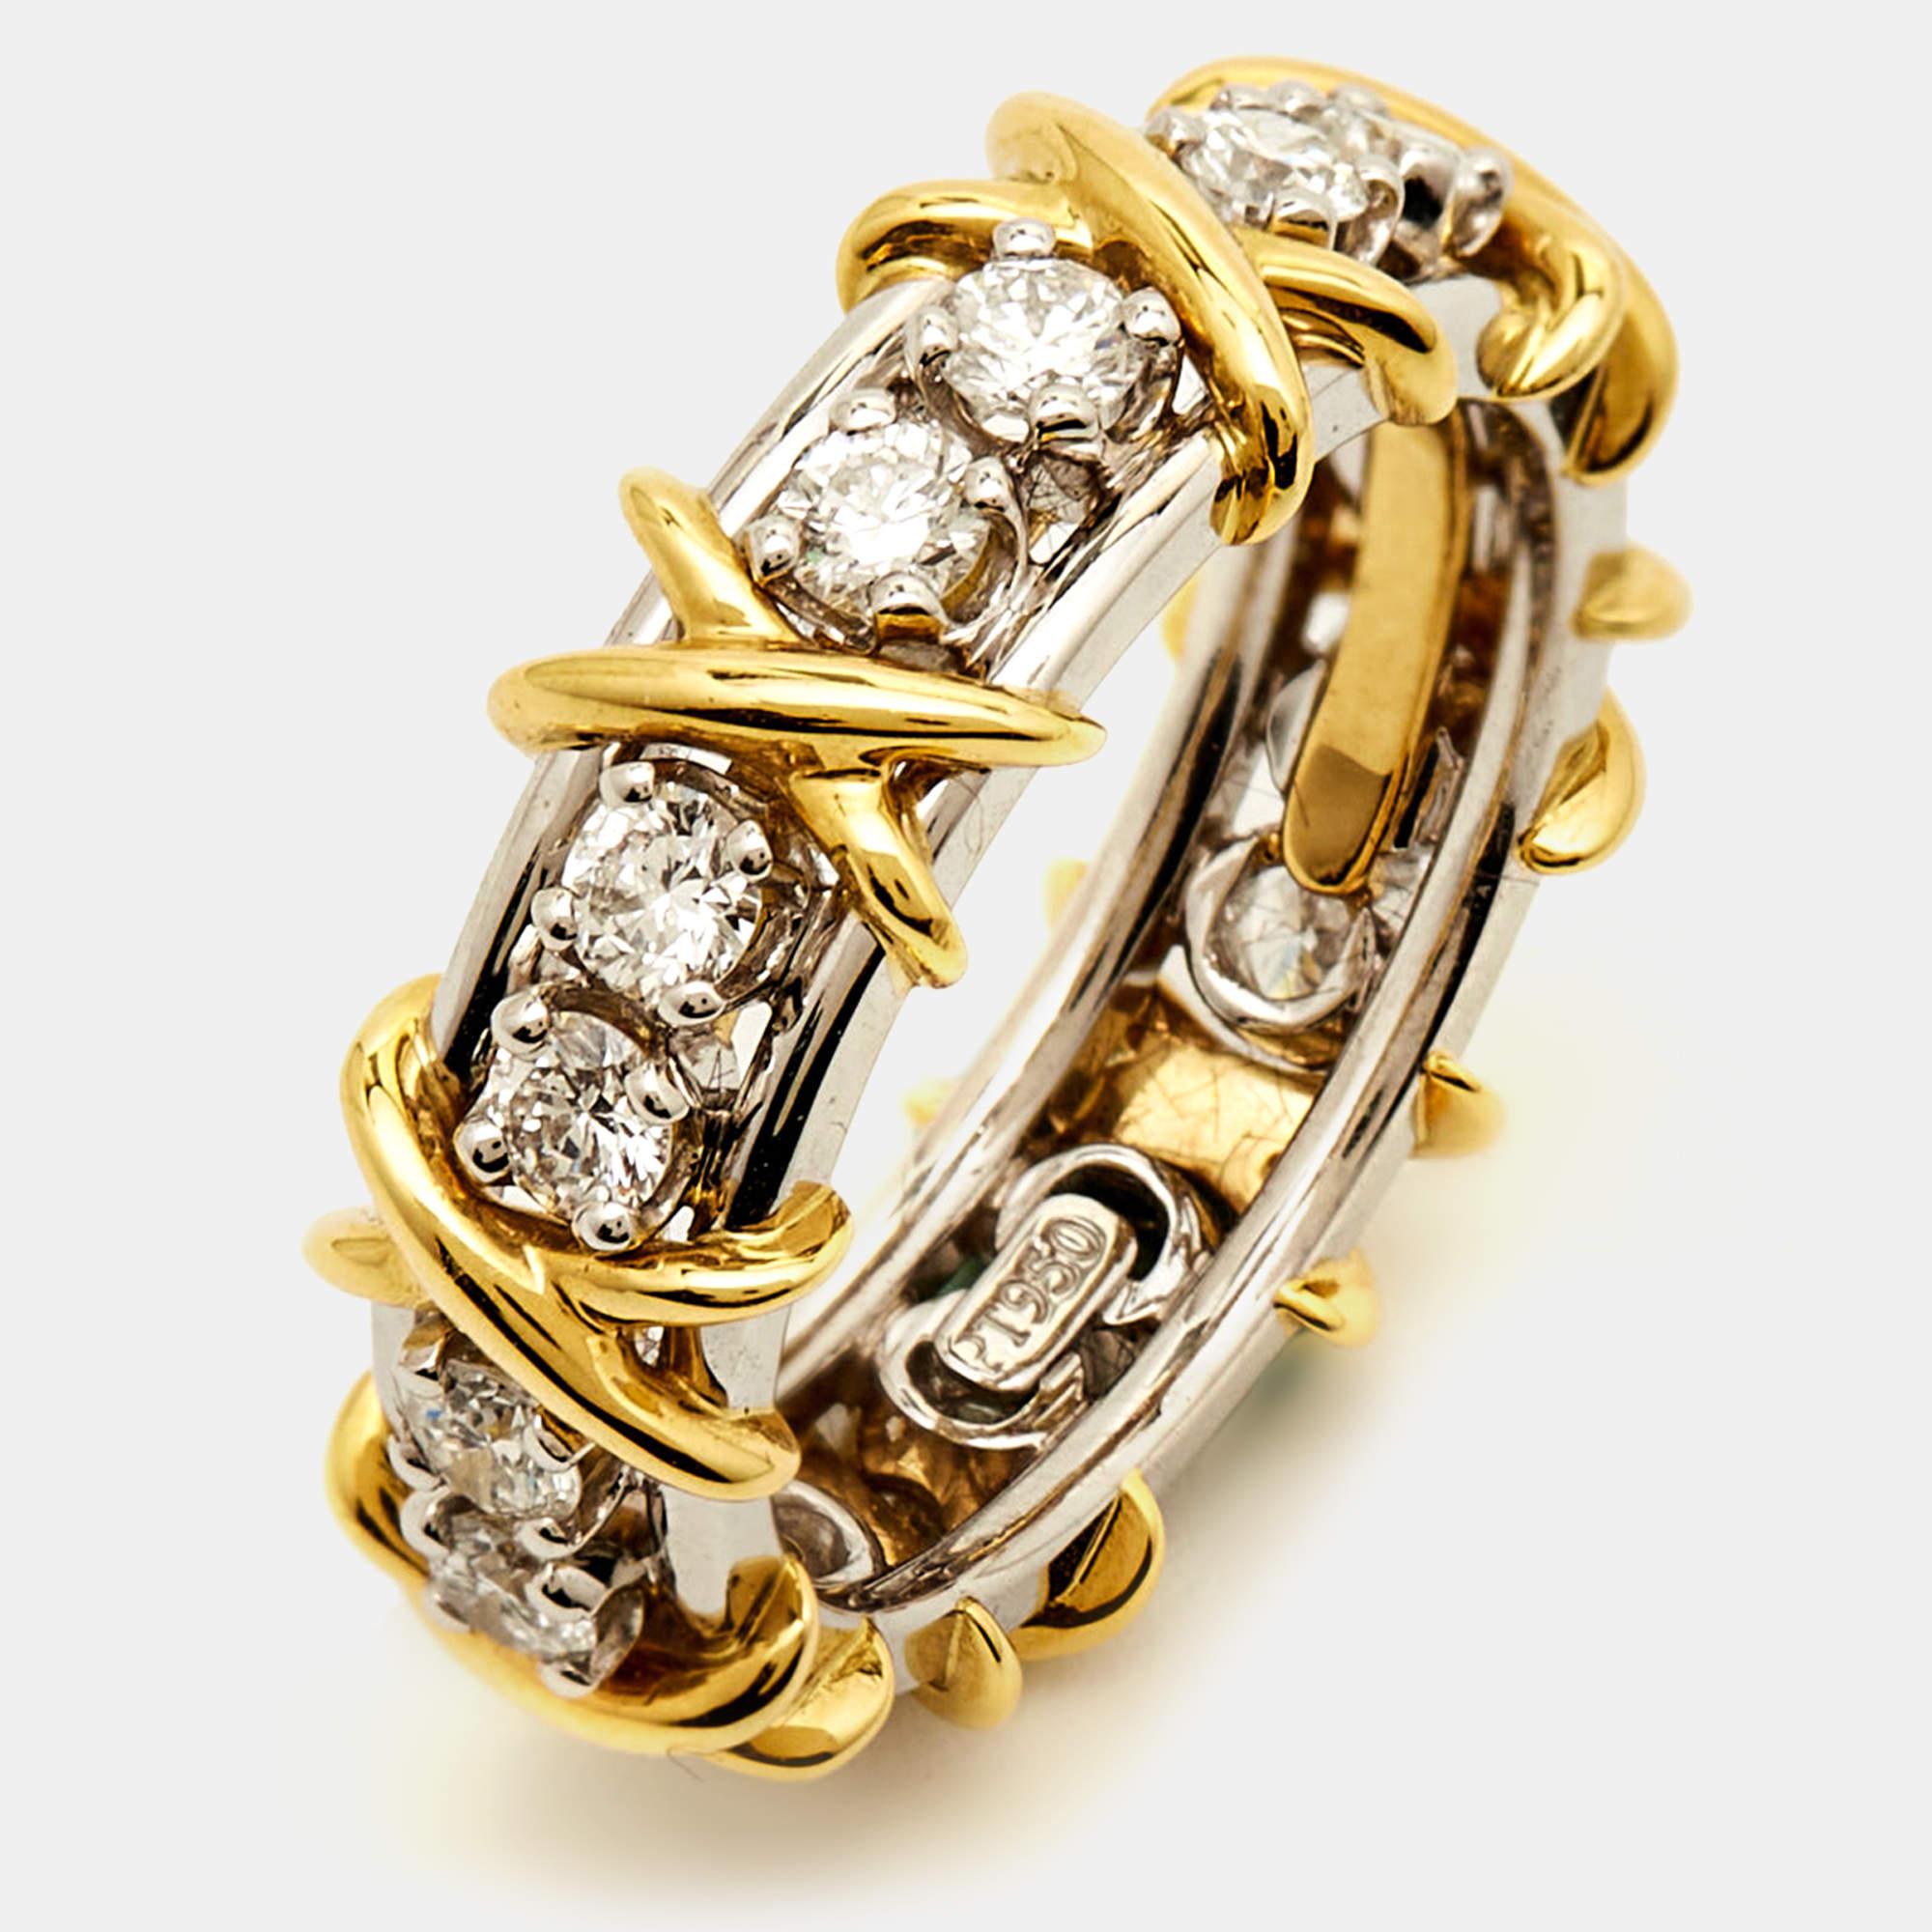 In his time, Jean Schlumberger was one of the most acclaimed jewelry designers with the likes of Elizabeth Taylor on his clientele list. His designs are nature-inspired and nothing short of wondrous. The Sixteen Stone Rings line has long been an